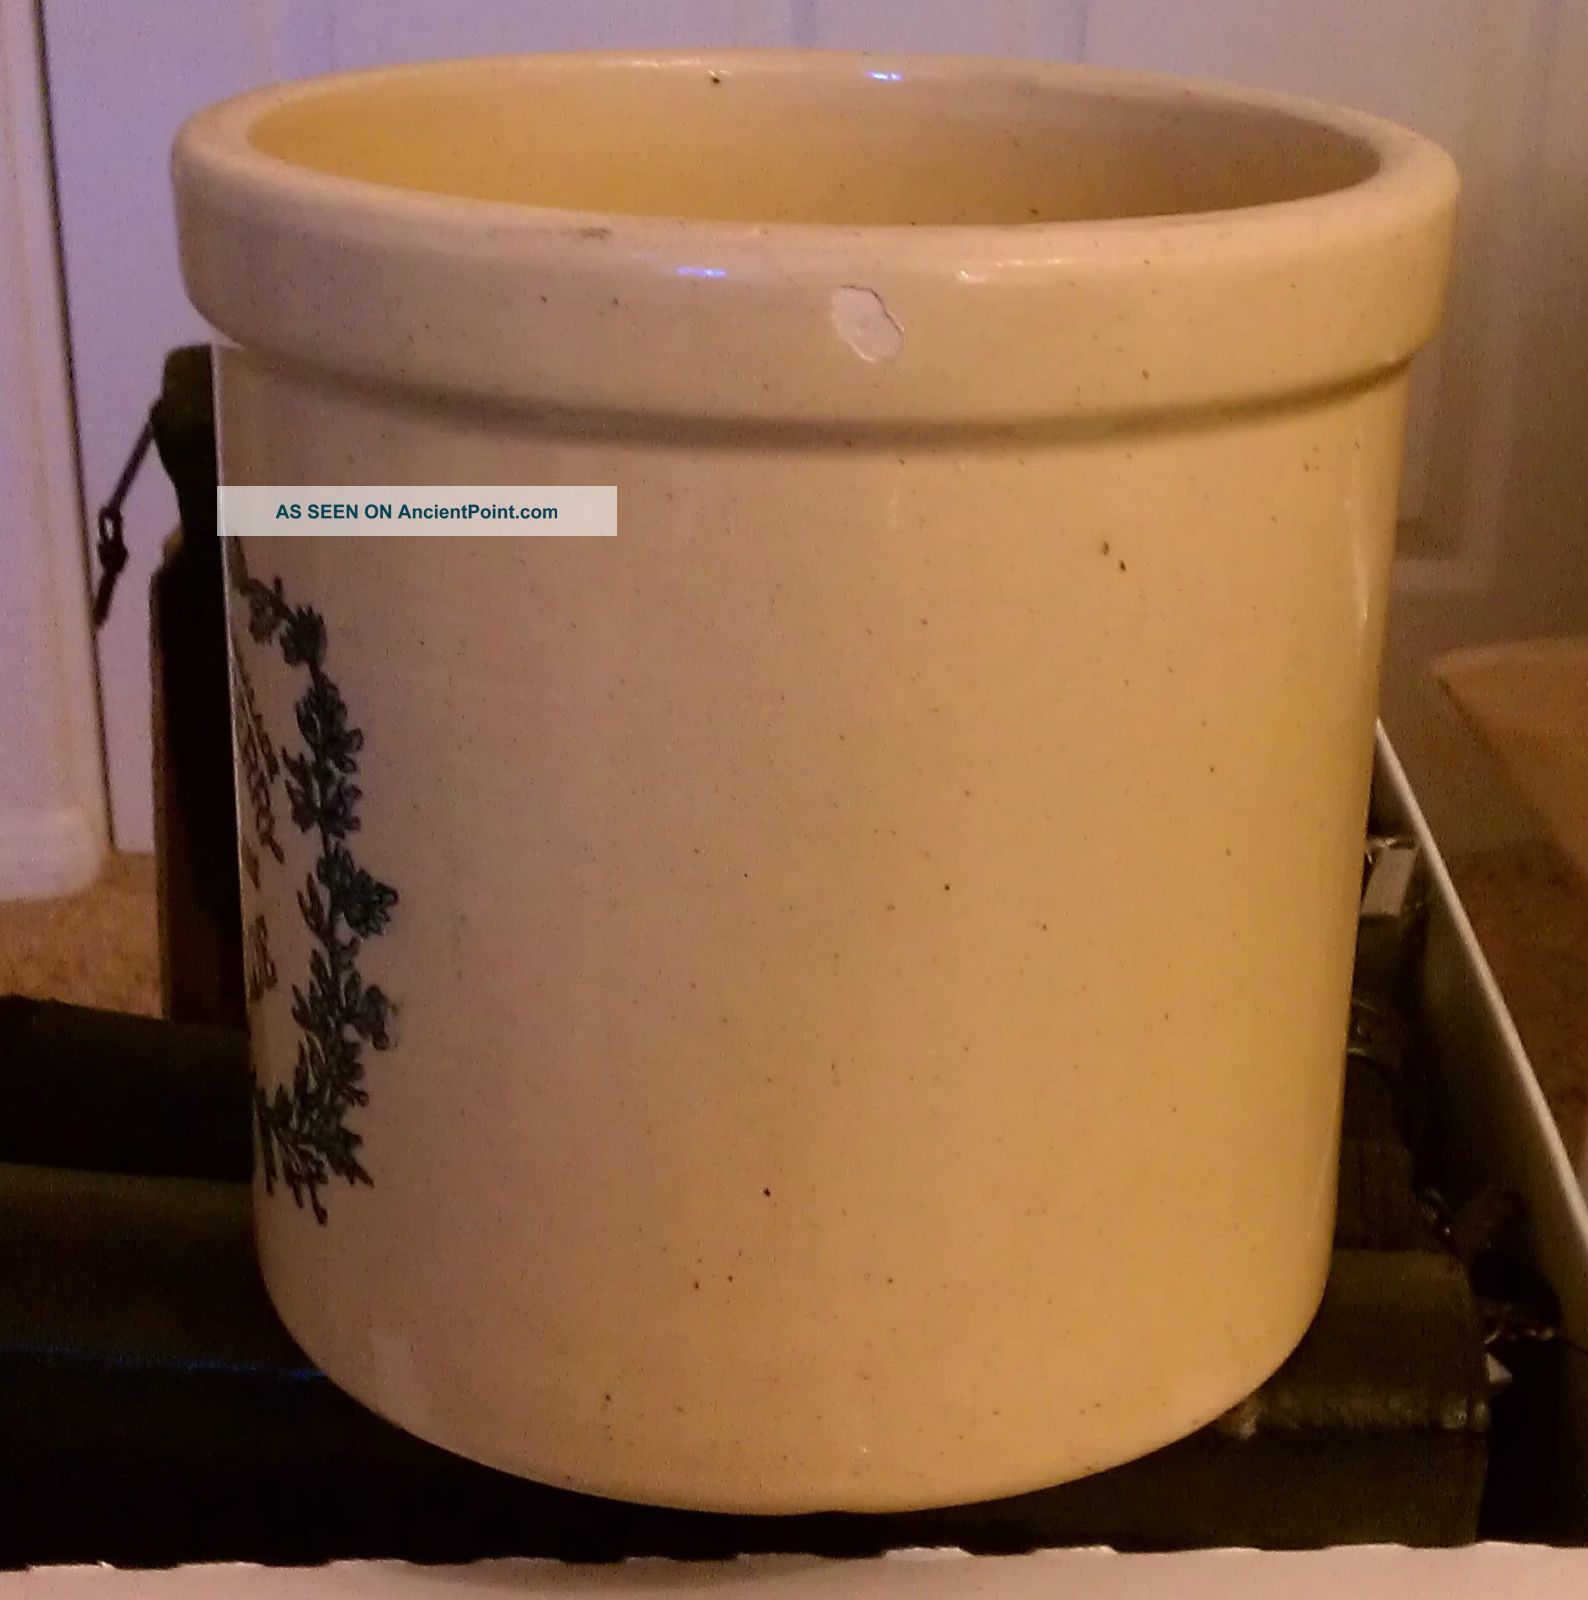  - 1_gallon_james_carberry_marmalade_blue_advertising_decorated_stoneware_crock_2_lgw